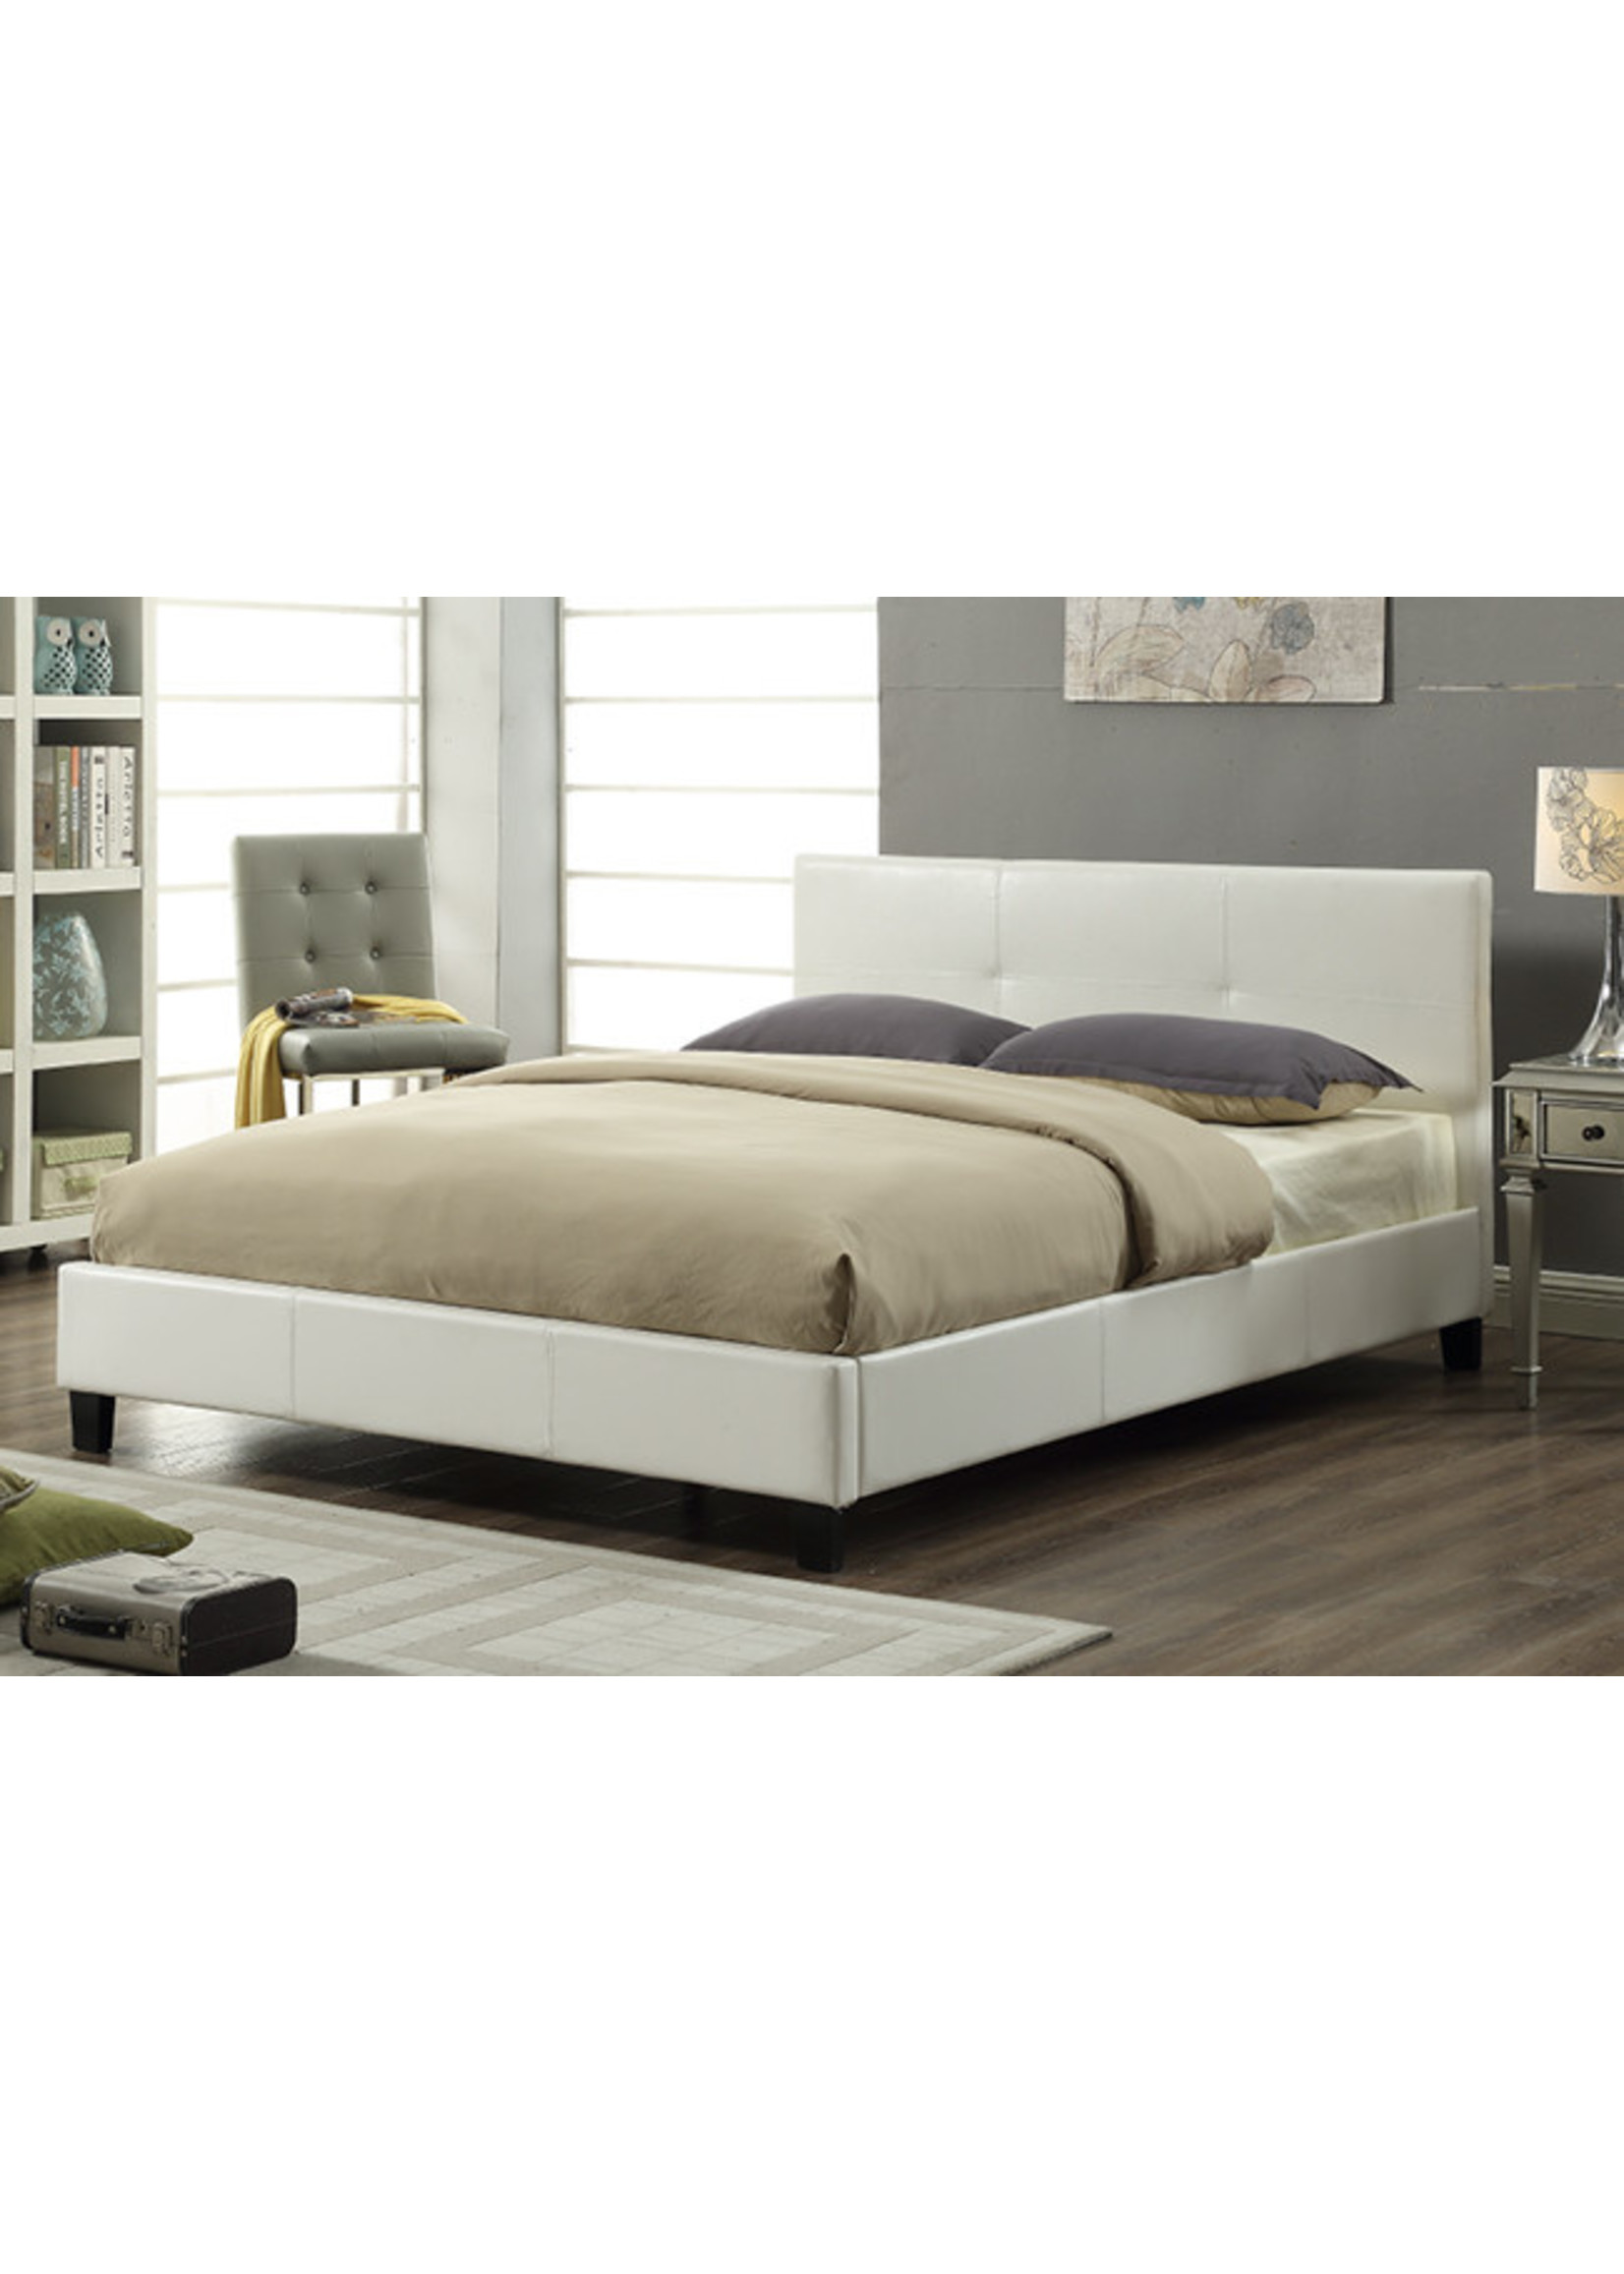 DOUBLE(FULL) WHITE FAUX LEATHER BED FRAME